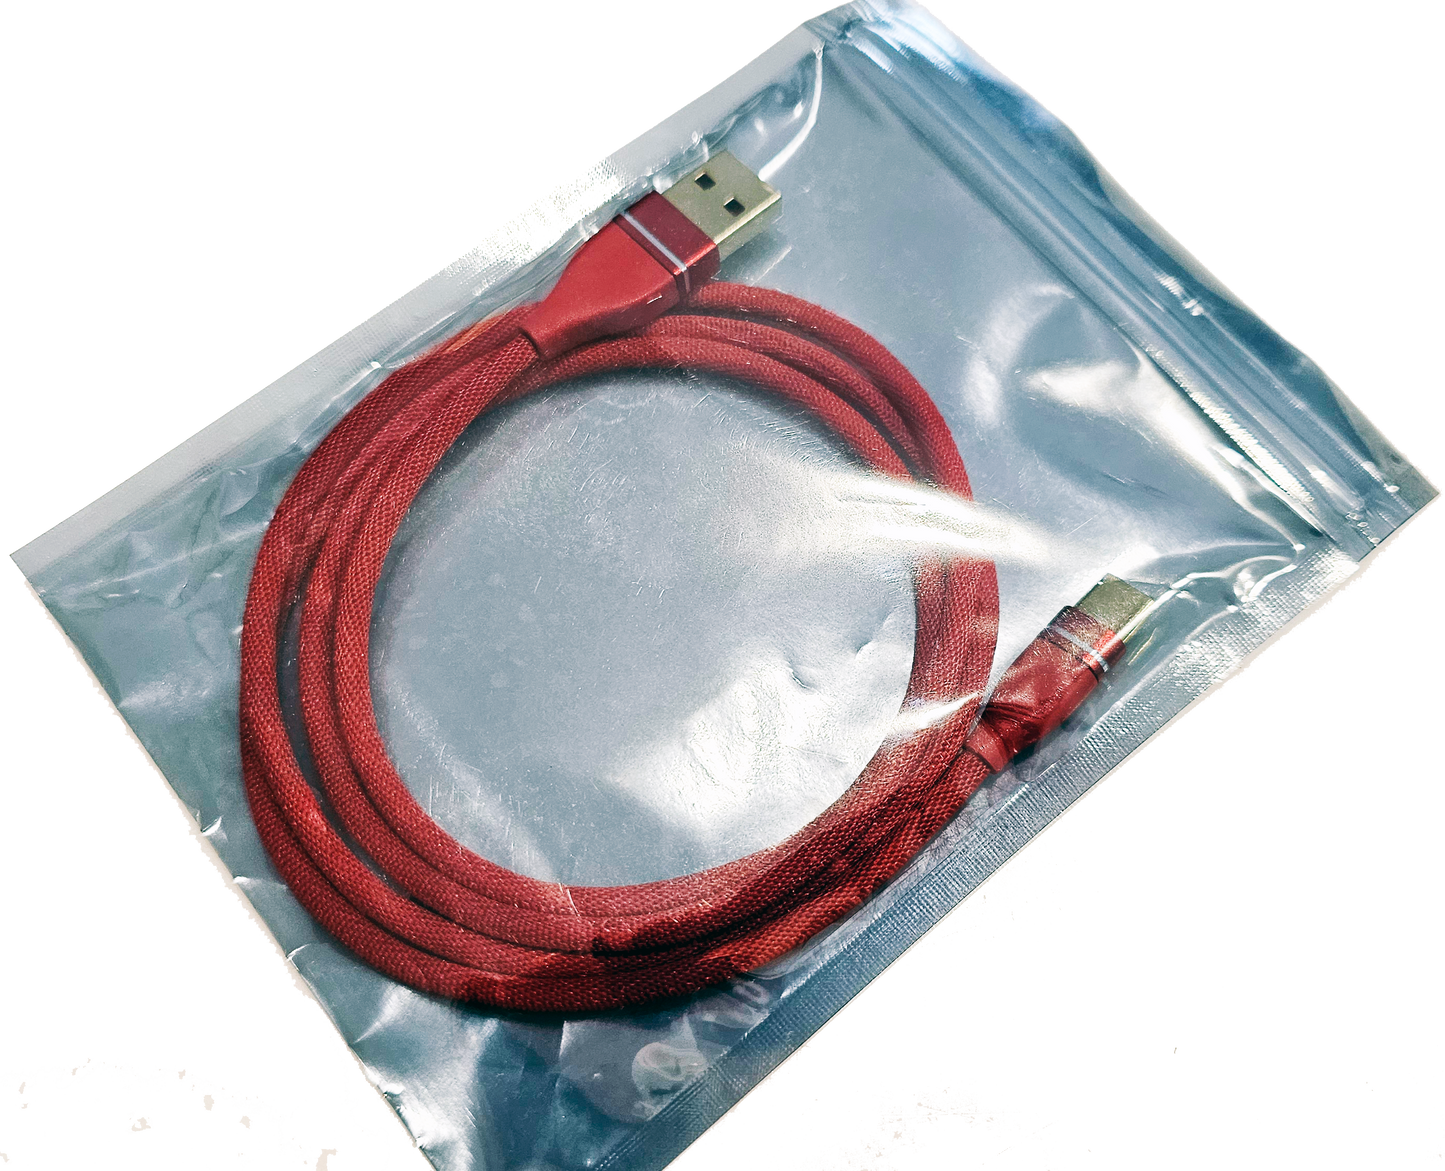 Generic USB 2.0 Type-A to Type-C Cable. 1m, Braided, Red